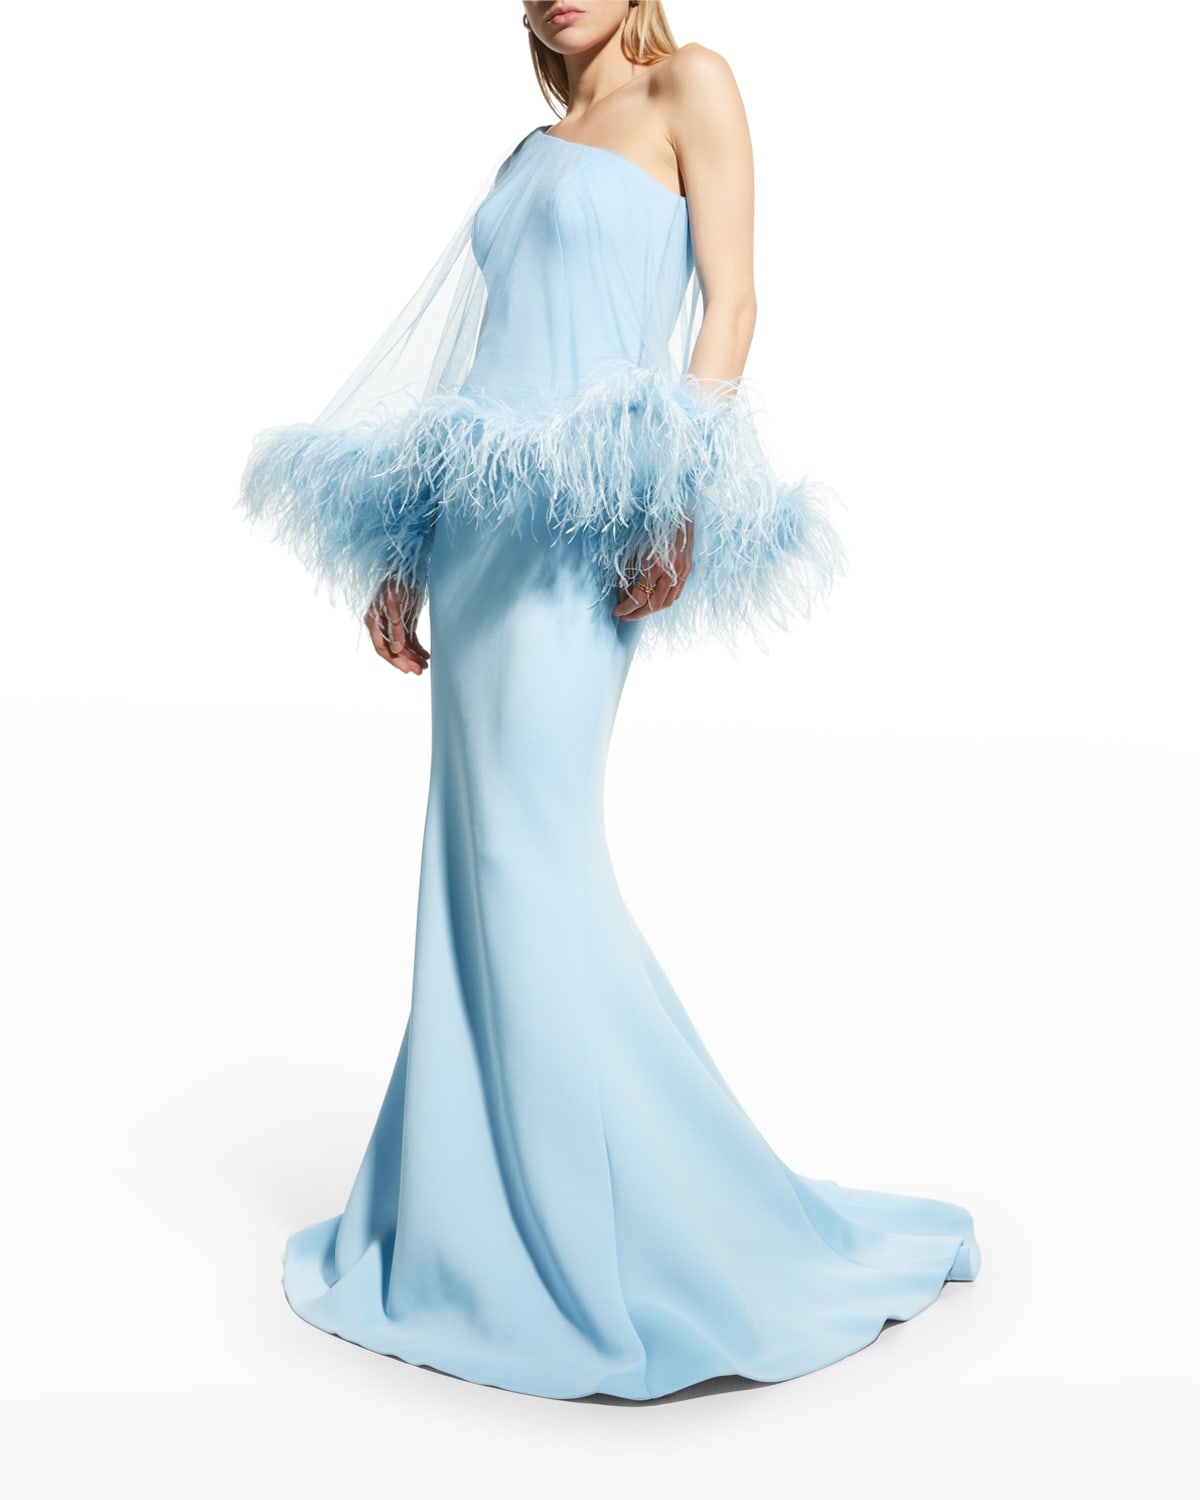 Jovani One-Shoulder Gown w/ Sheer Feathered Overlay